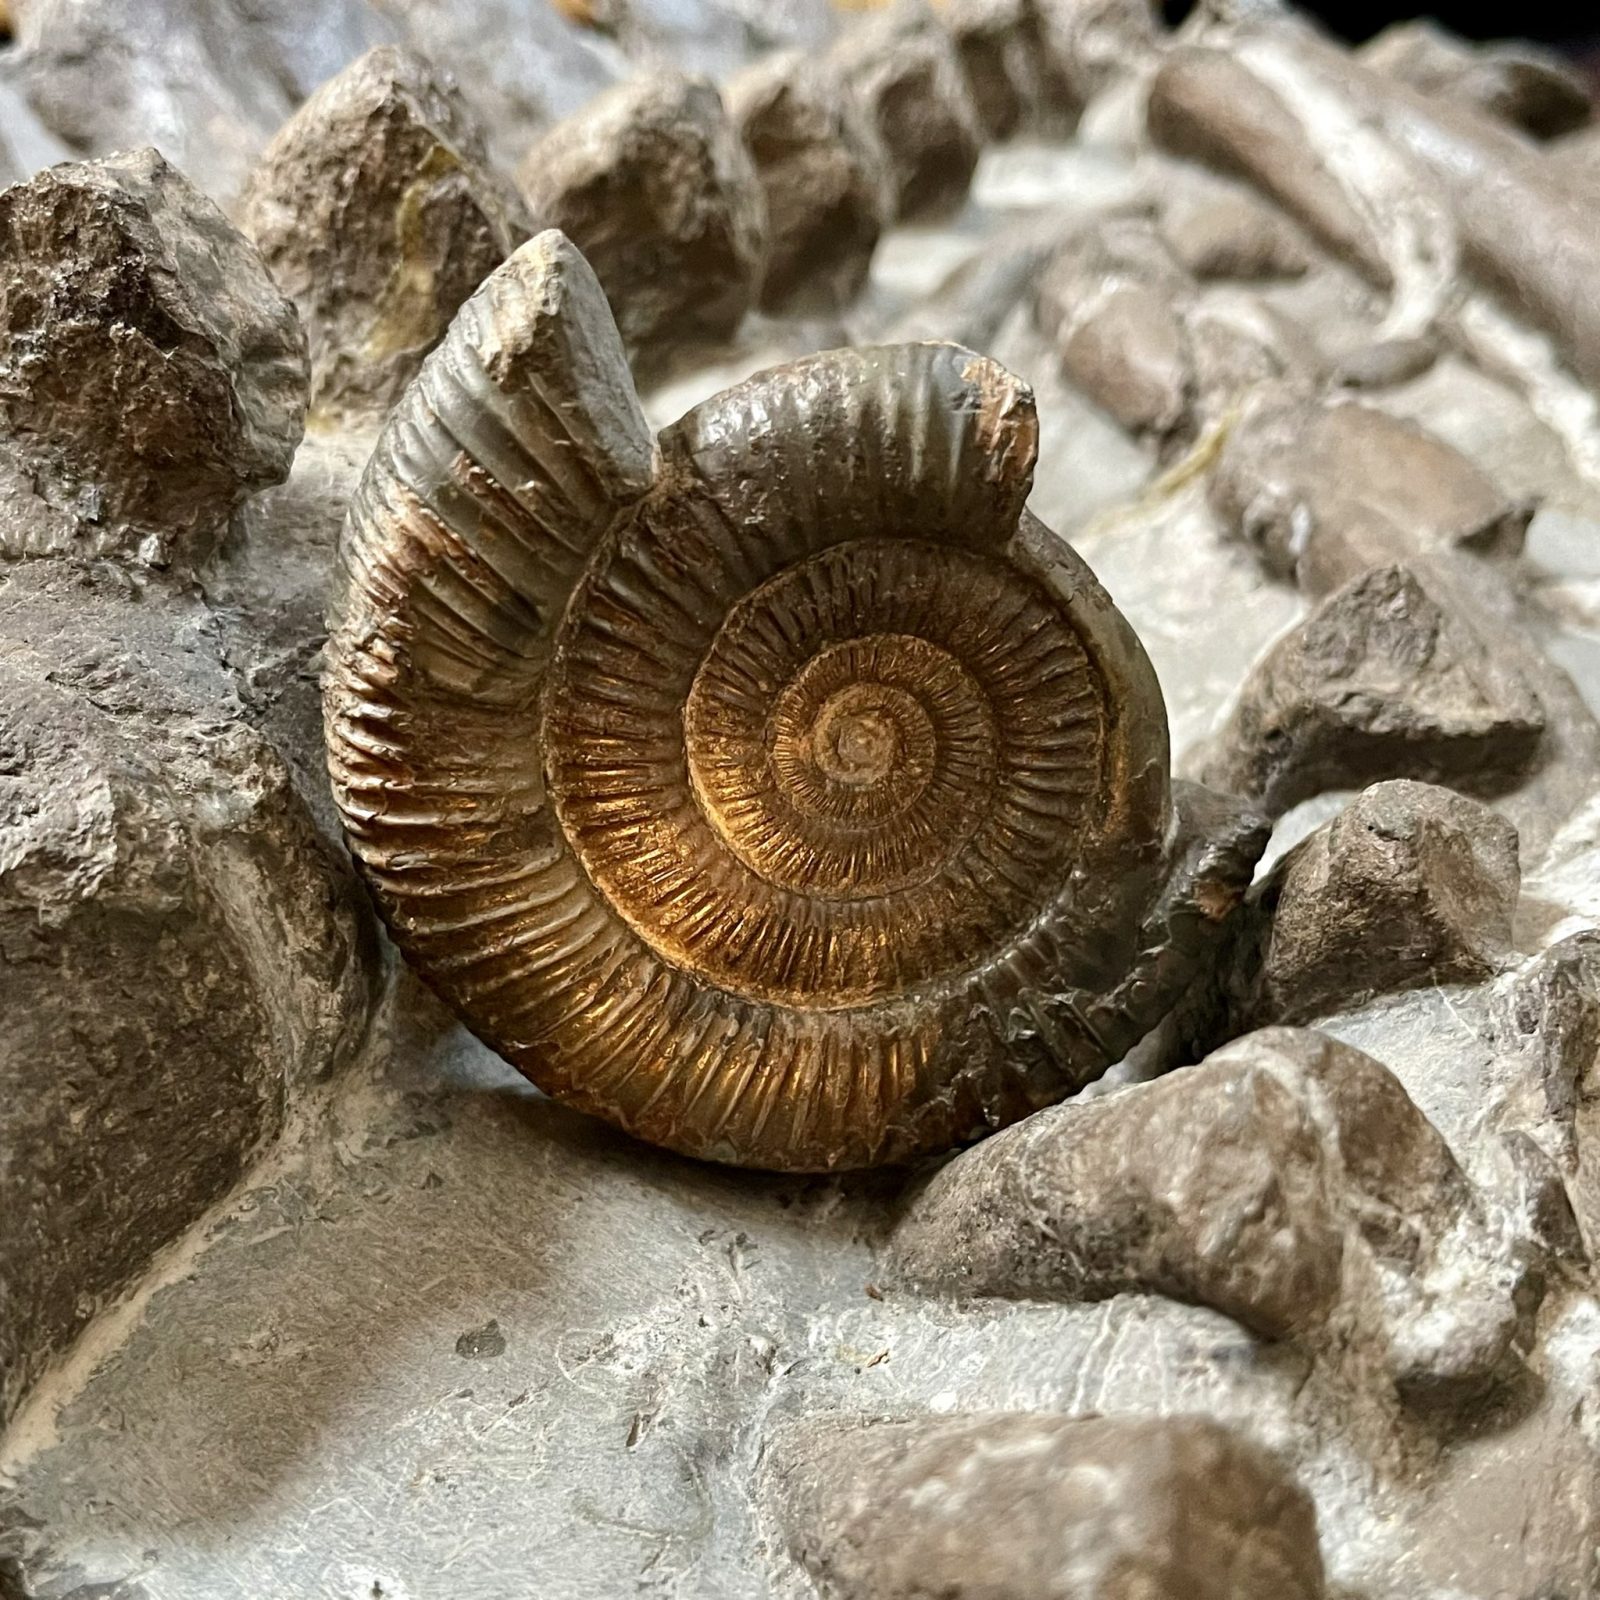 Fossil in museum.